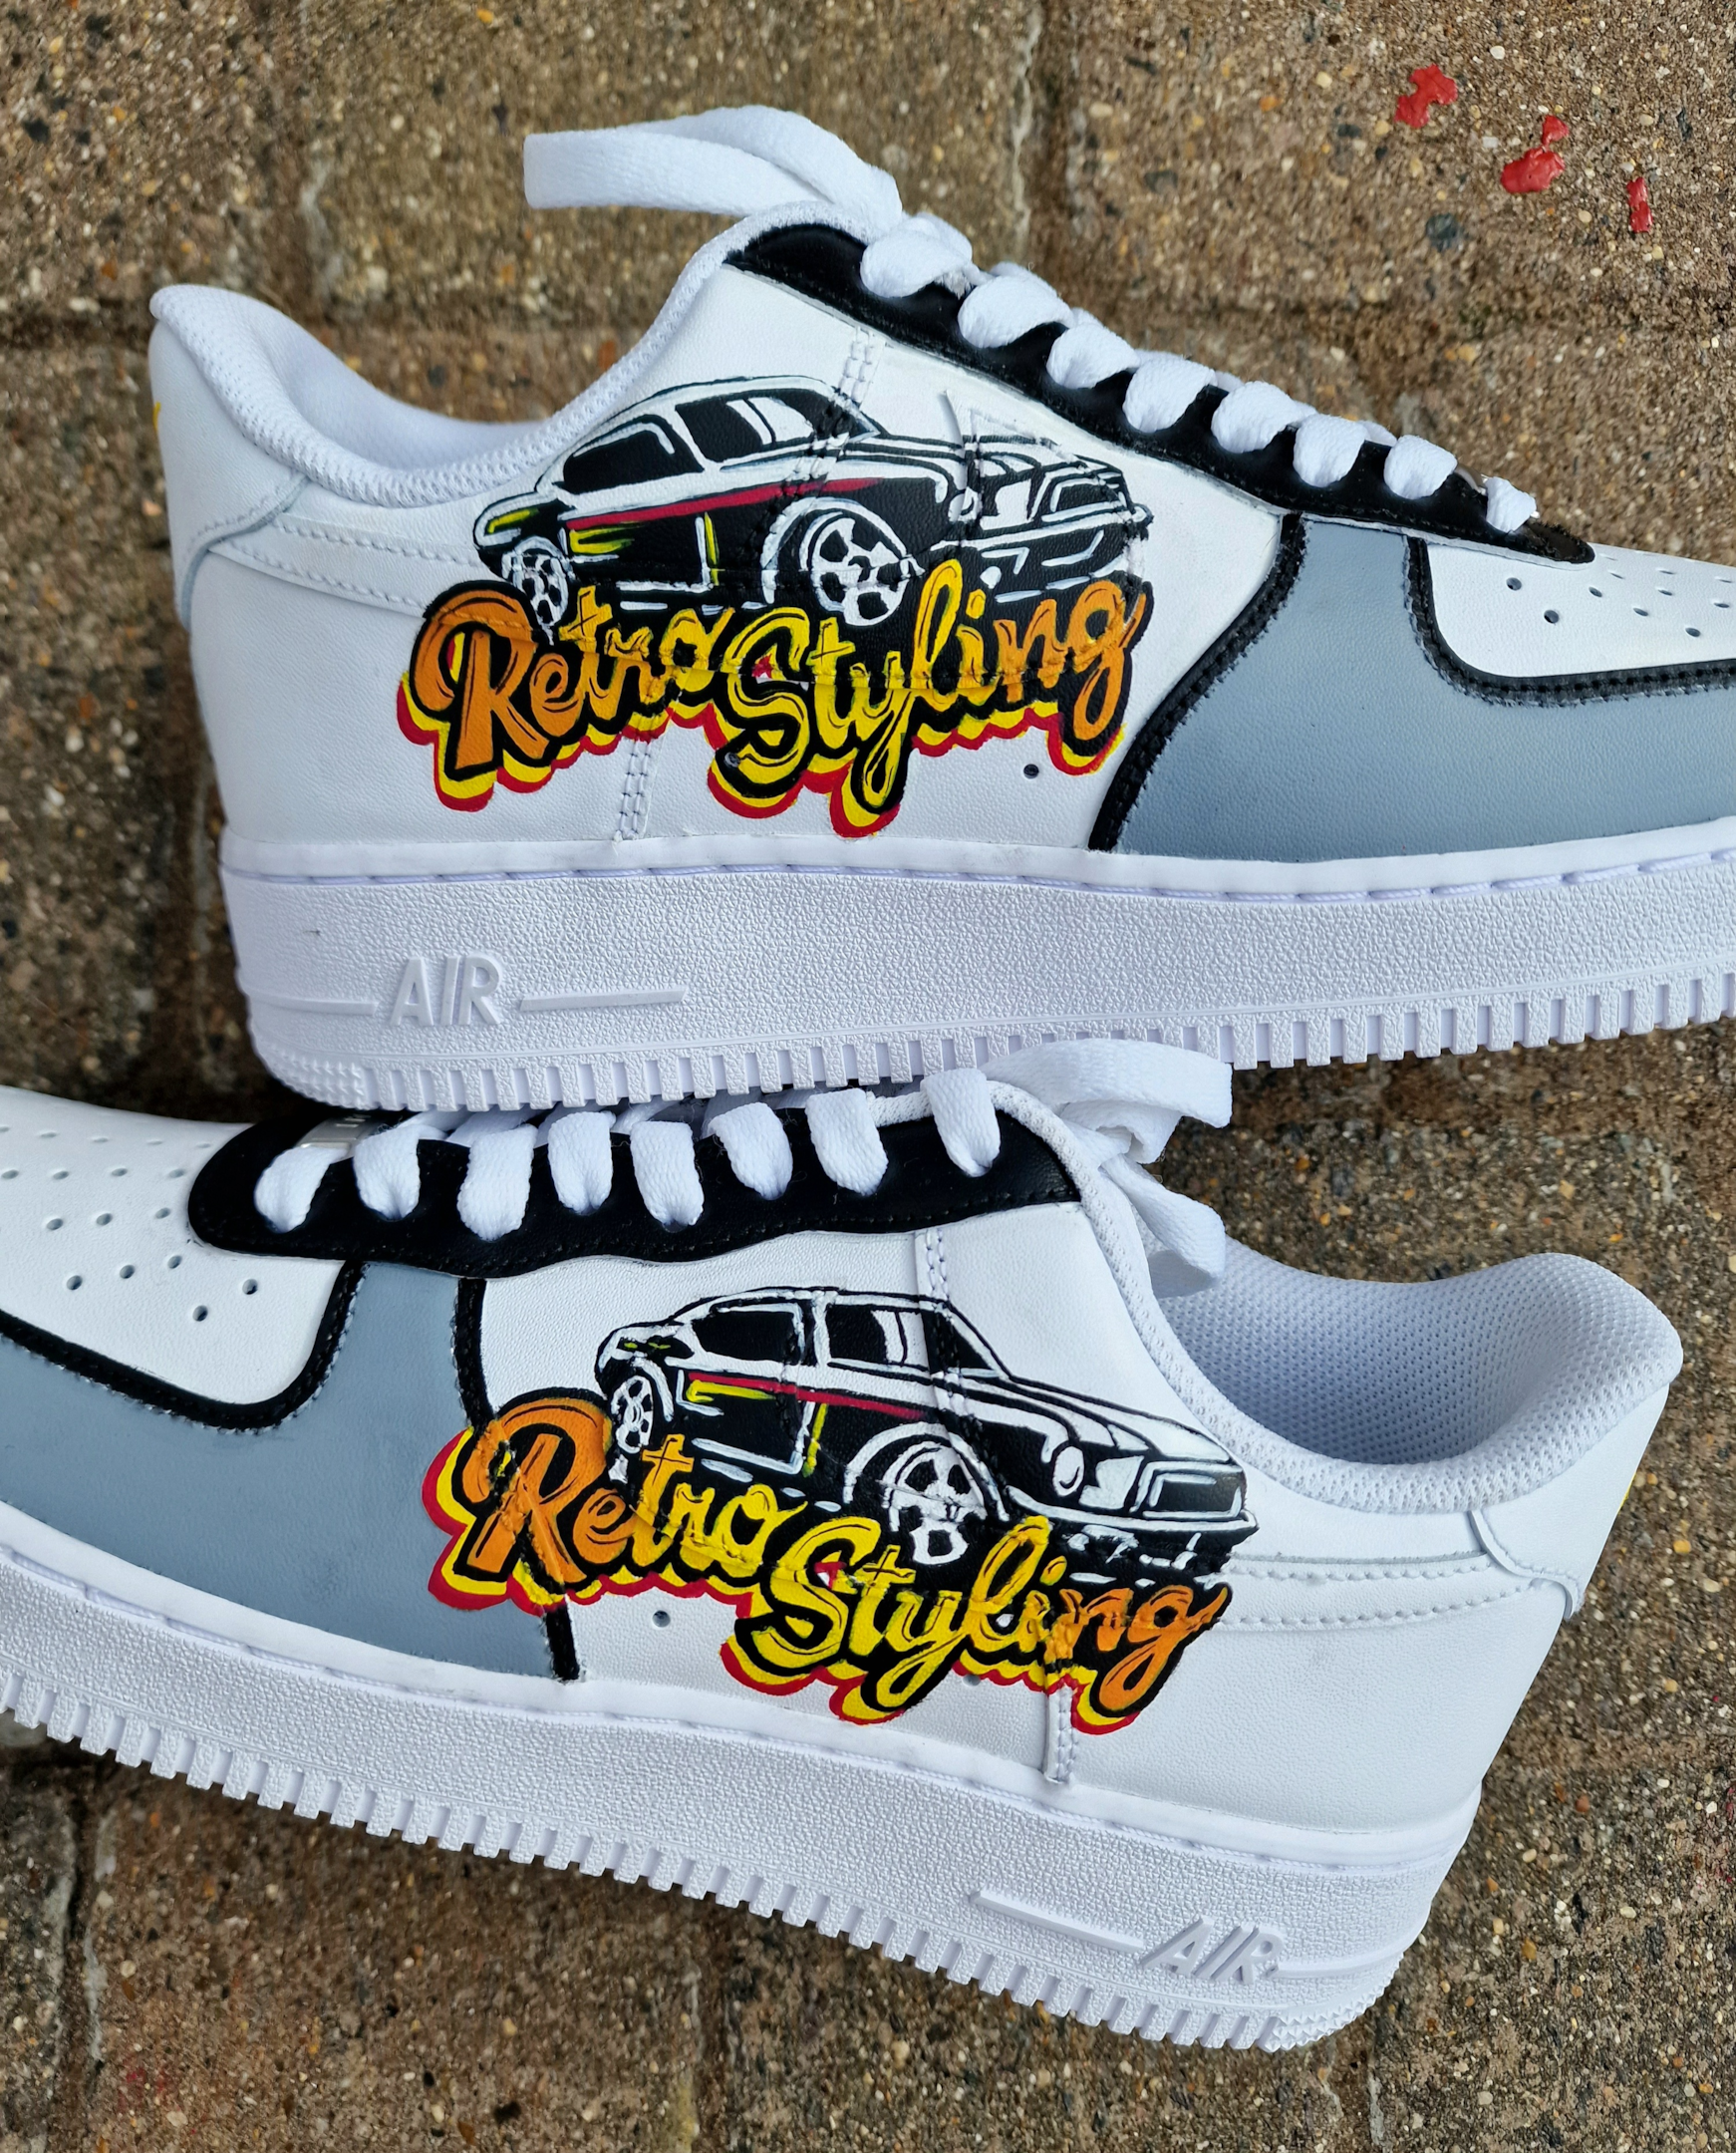 Custom Nike AF1s painted for Car detailing company - 'Retro styling'